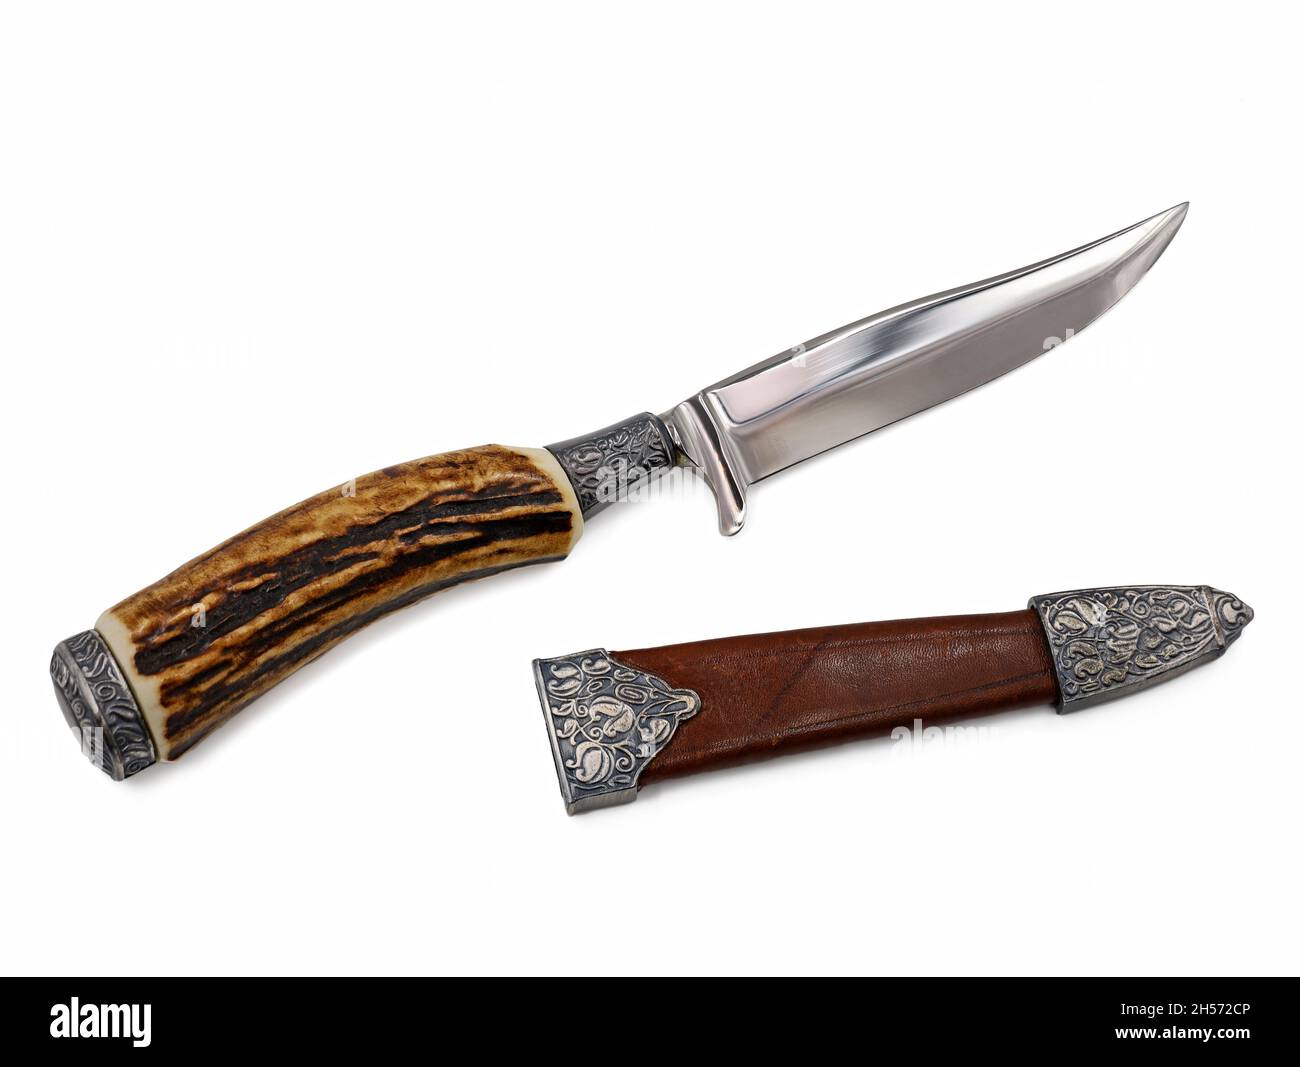 https://c8.alamy.com/comp/2H572CP/horn-hunting-knife-with-protective-cover-isolated-on-white-background-2H572CP.jpg